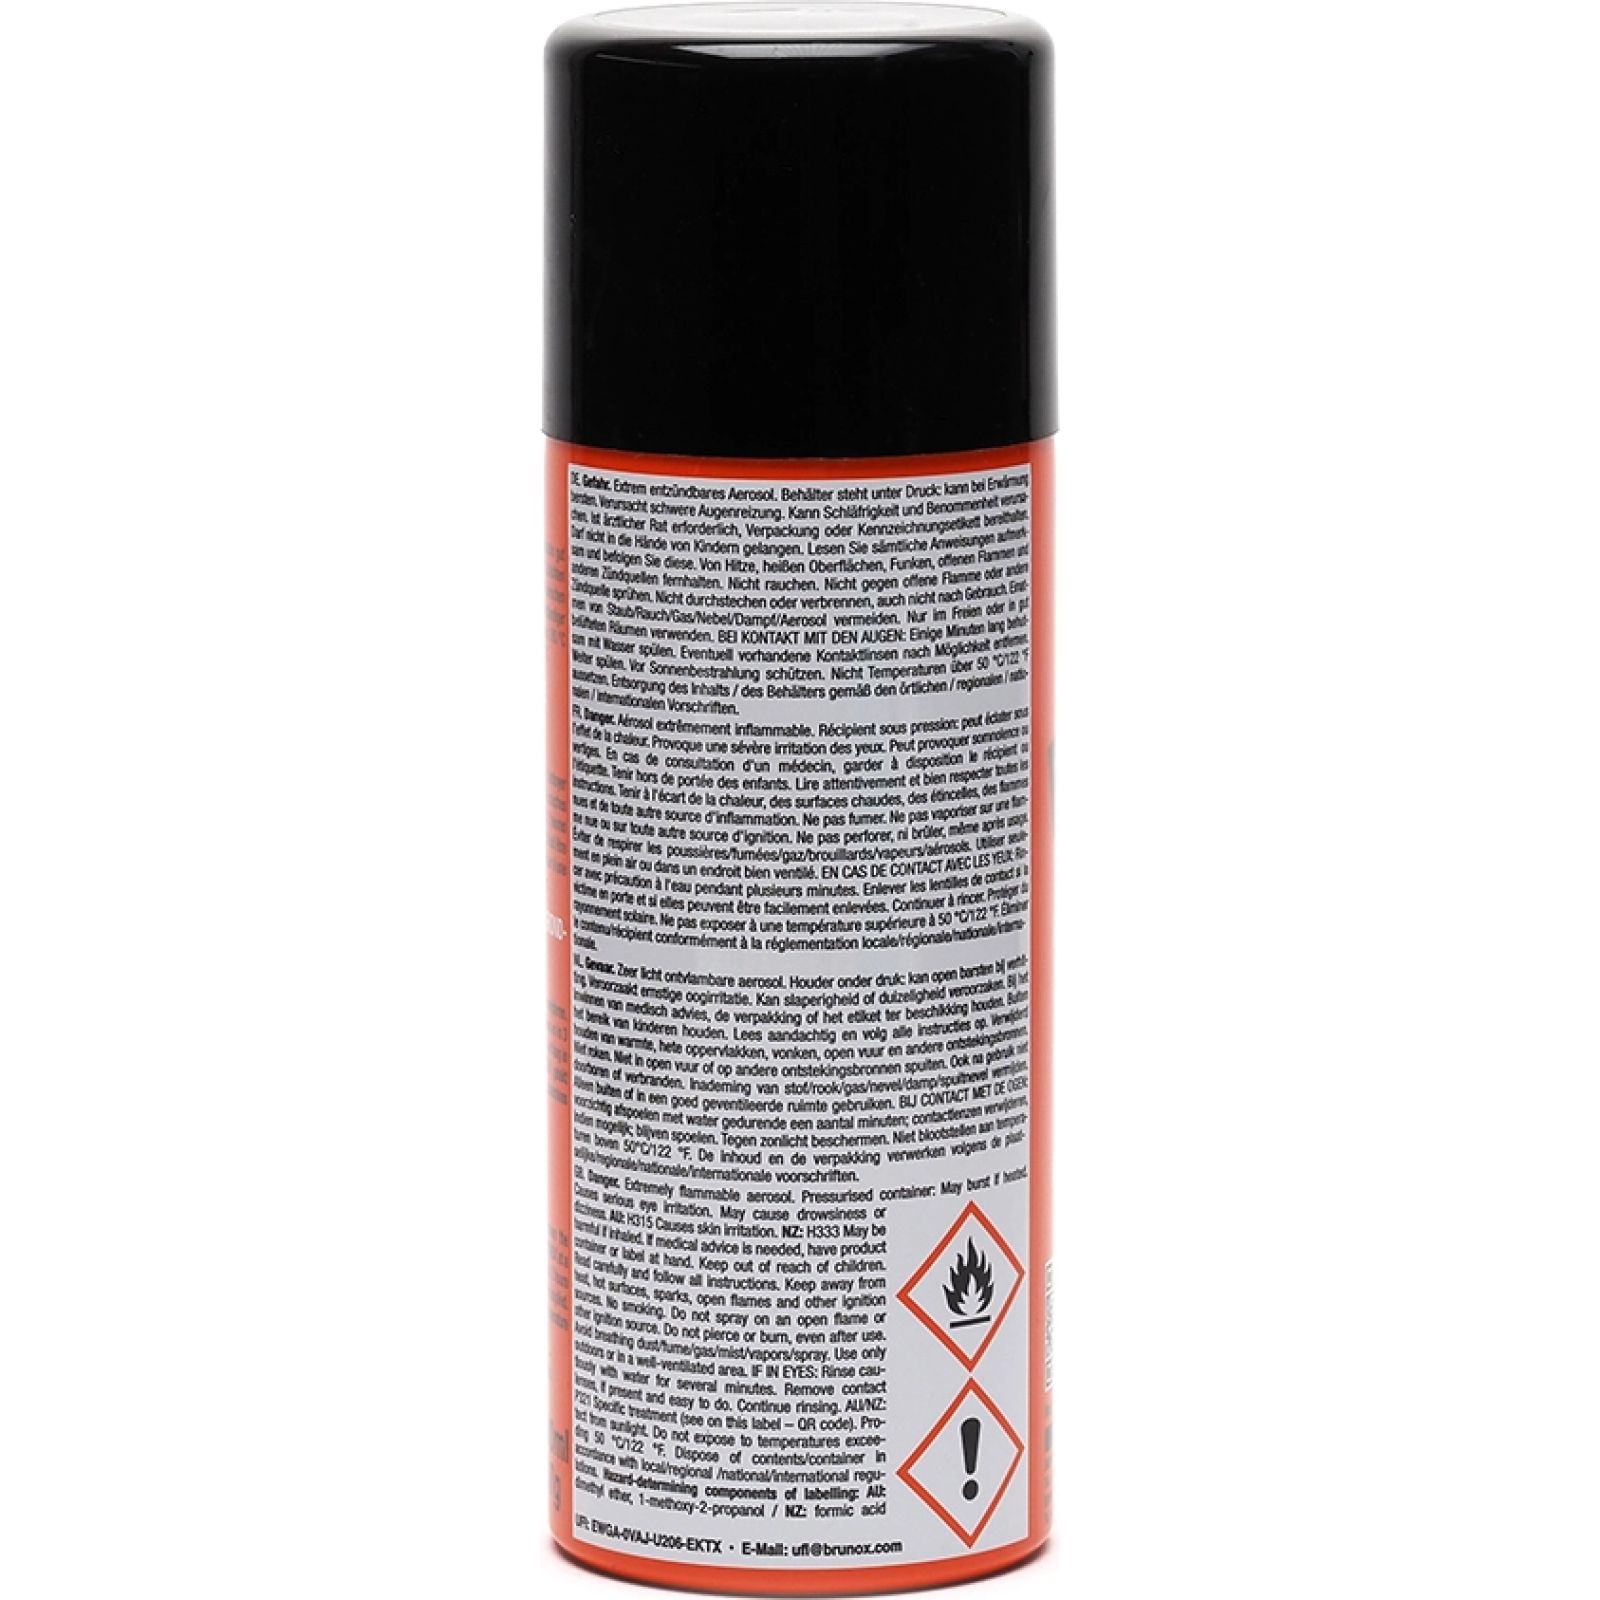 https://www.autoteile-store.at/img/product/brunox-epoxy-rostumwandler-400ml-53004-237832/e39d64af4cb20a77ed85789e8558ee85_1600.jpg